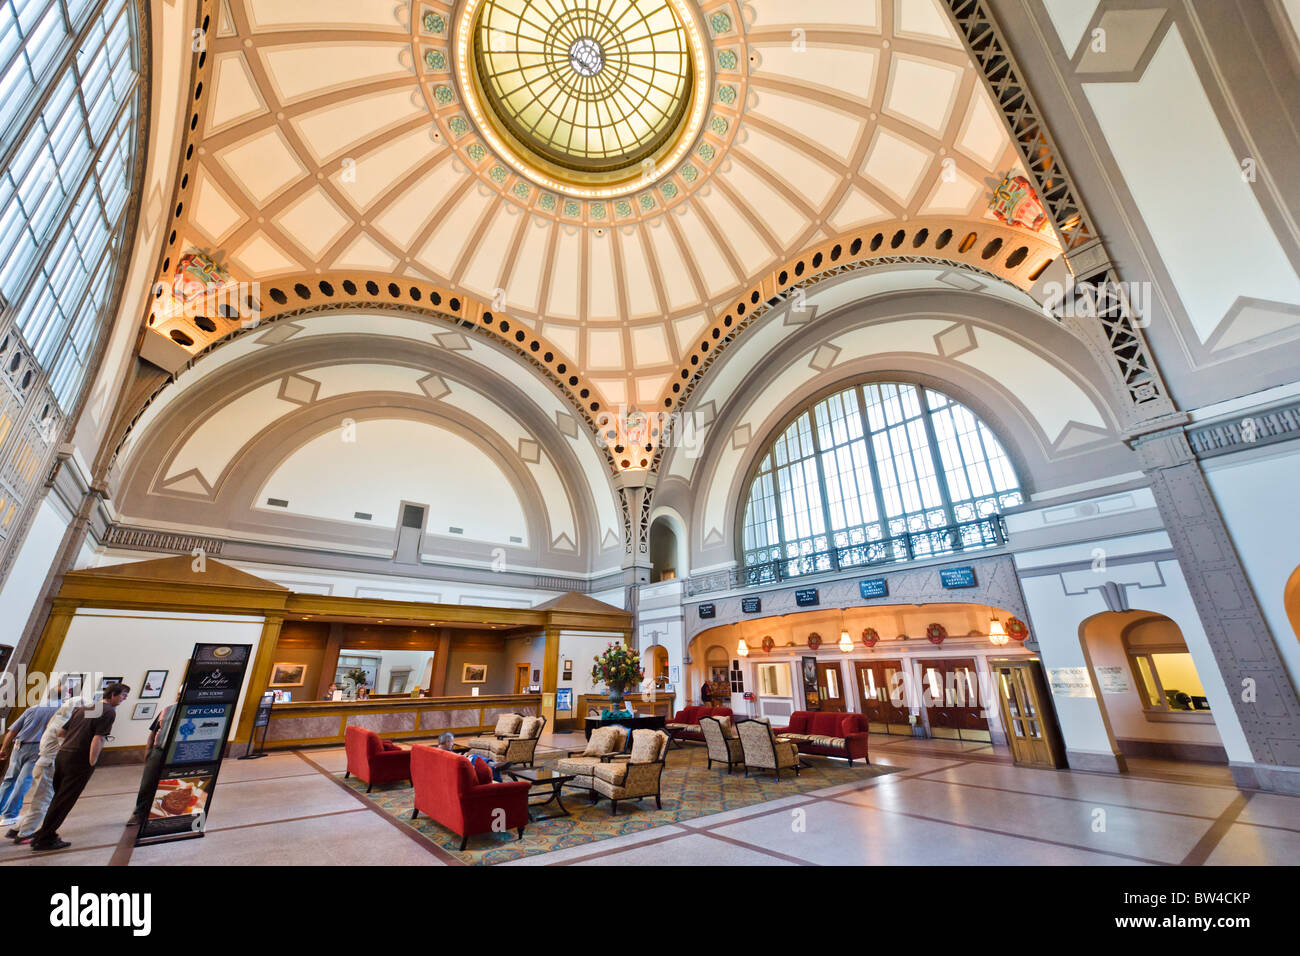 The lobby of the Chattanooga Choo Choo Hotel, formerly the terminal station, Chattanooga, Tennessee, USA Stock Photo